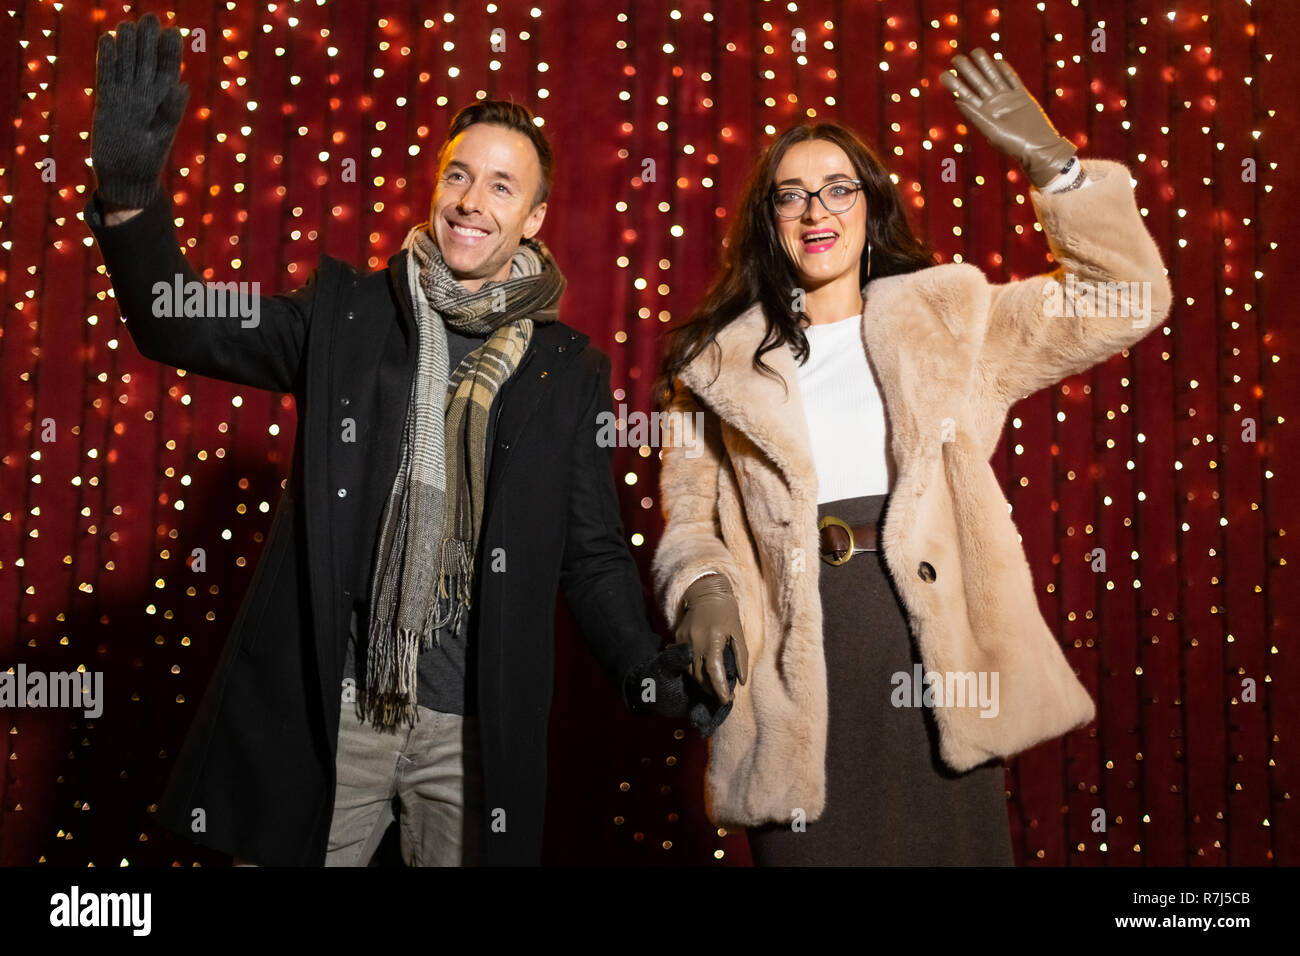 Couple waving for photo in front of light wall at Christmas market. Stock Photo